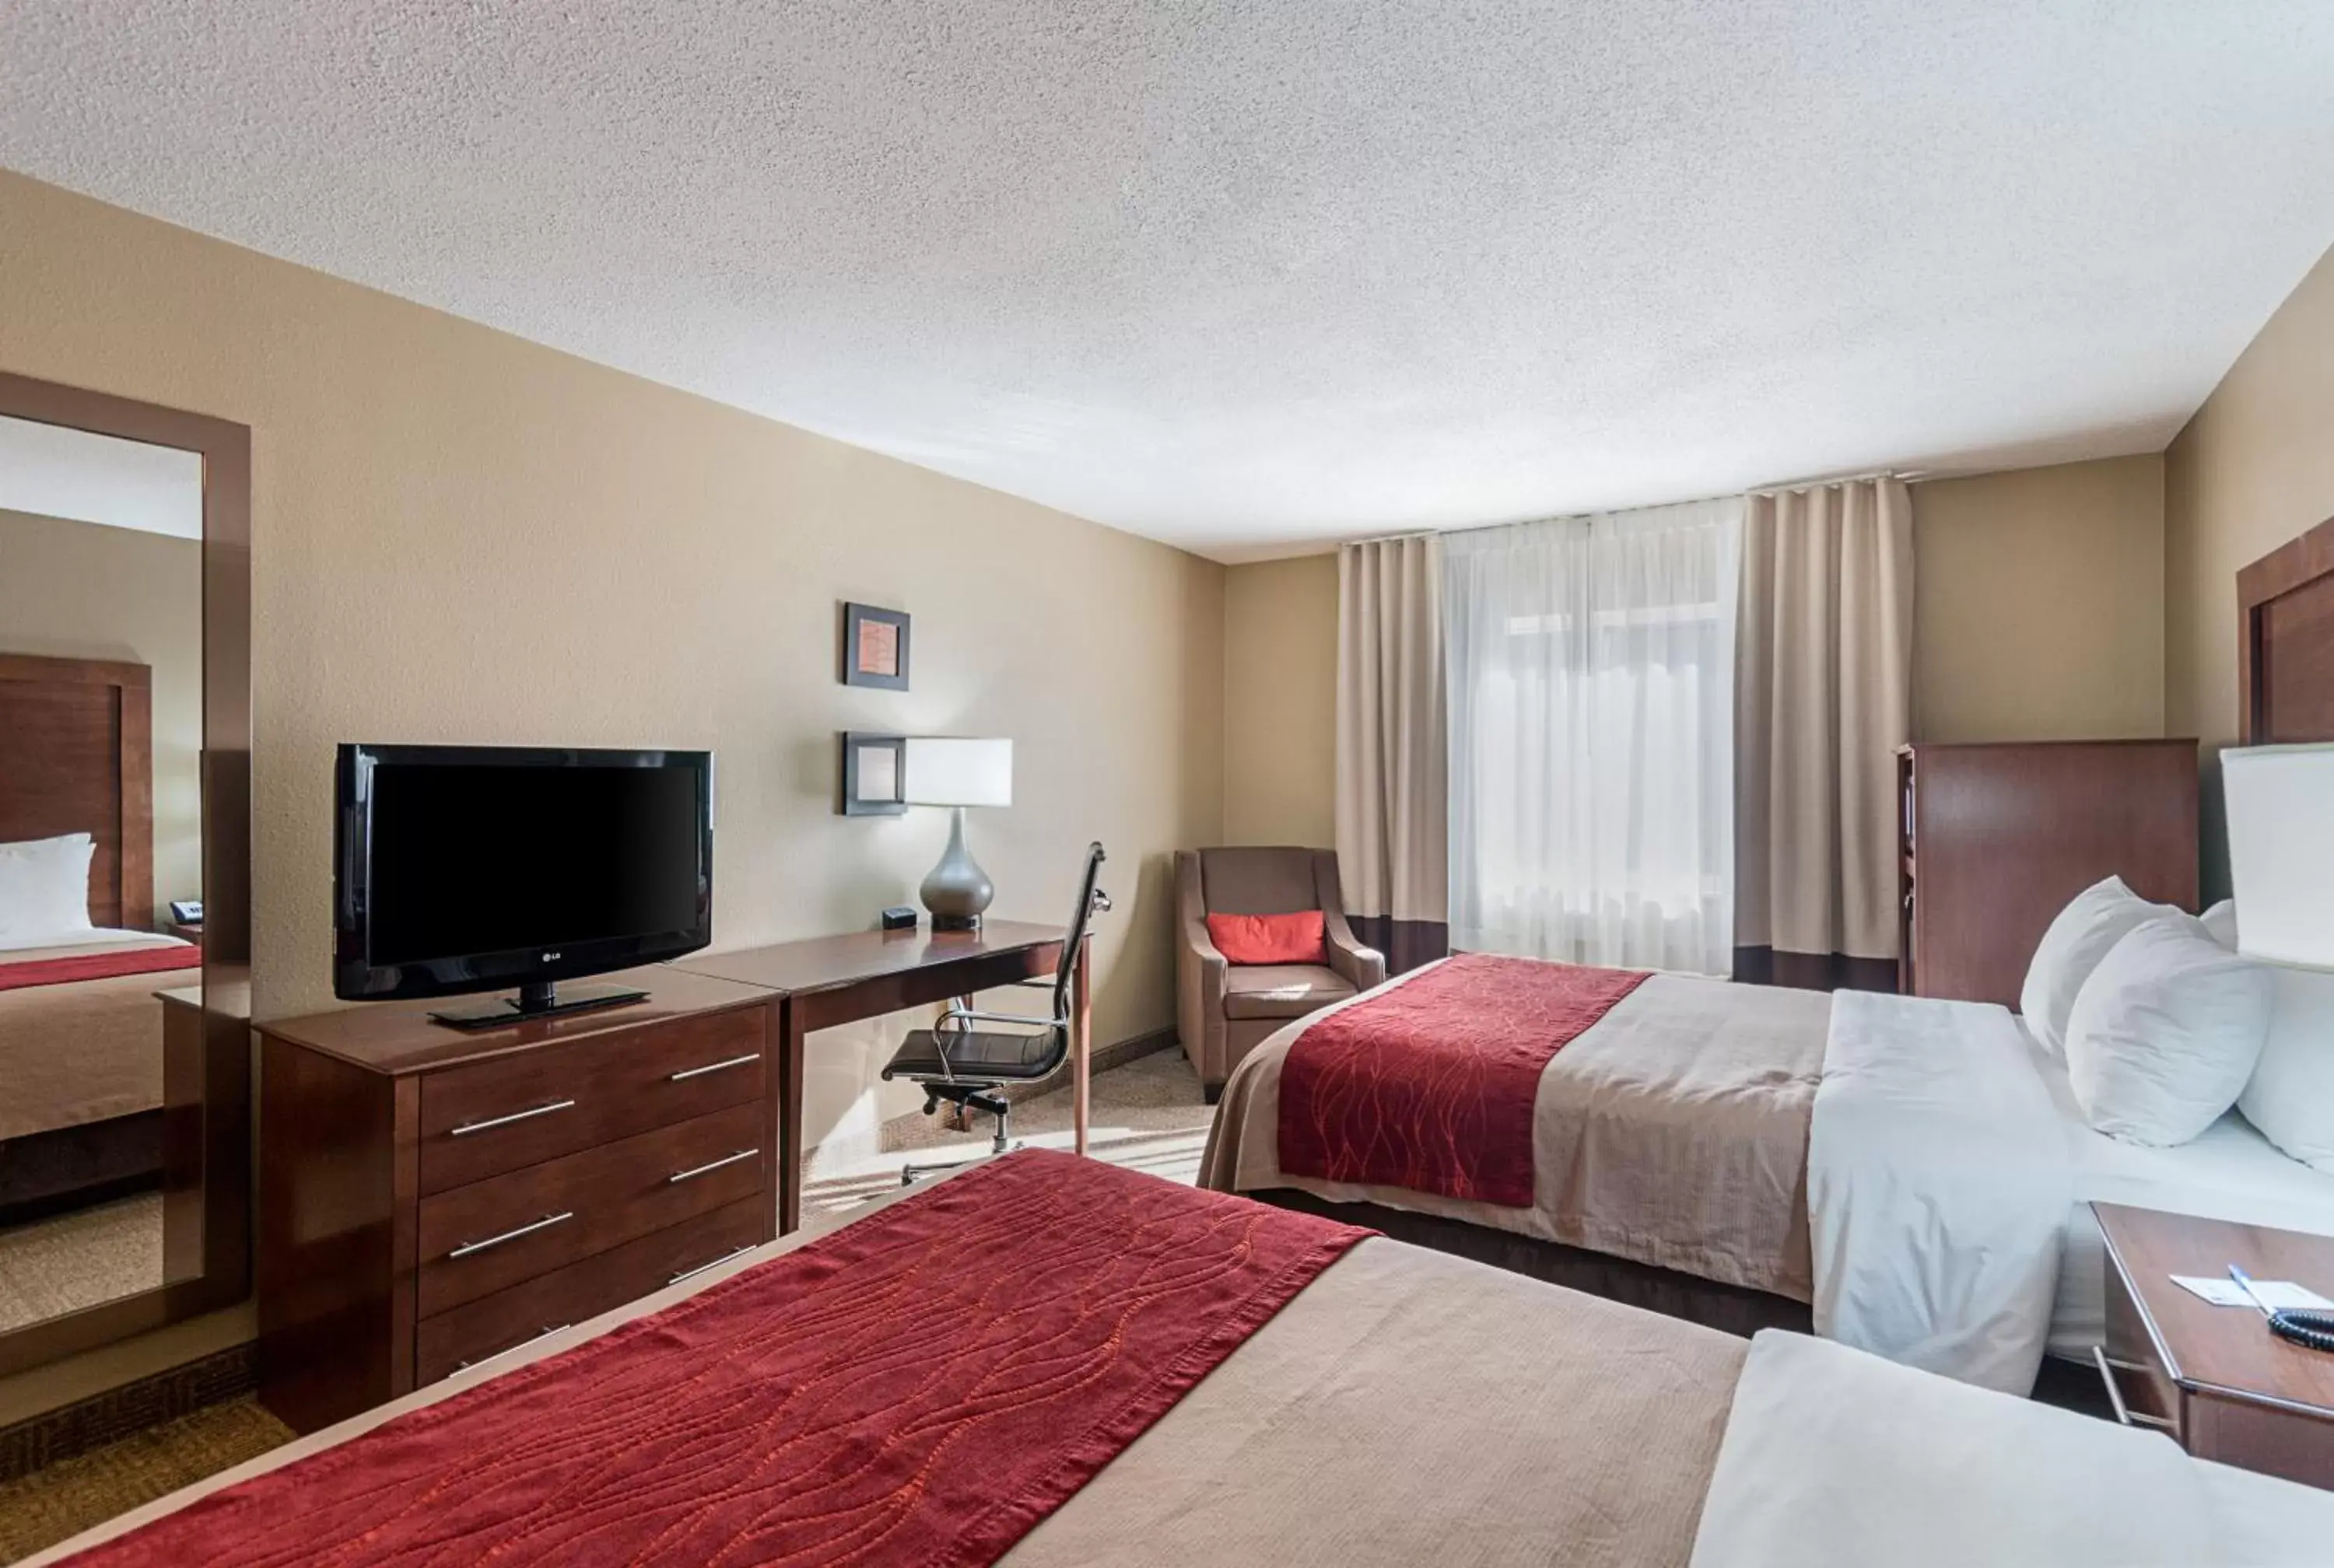 Standard, Two Queen Beds, Pet Friendly, Non-Smoking in Comfort Inn Barboursville near Huntington Mall area